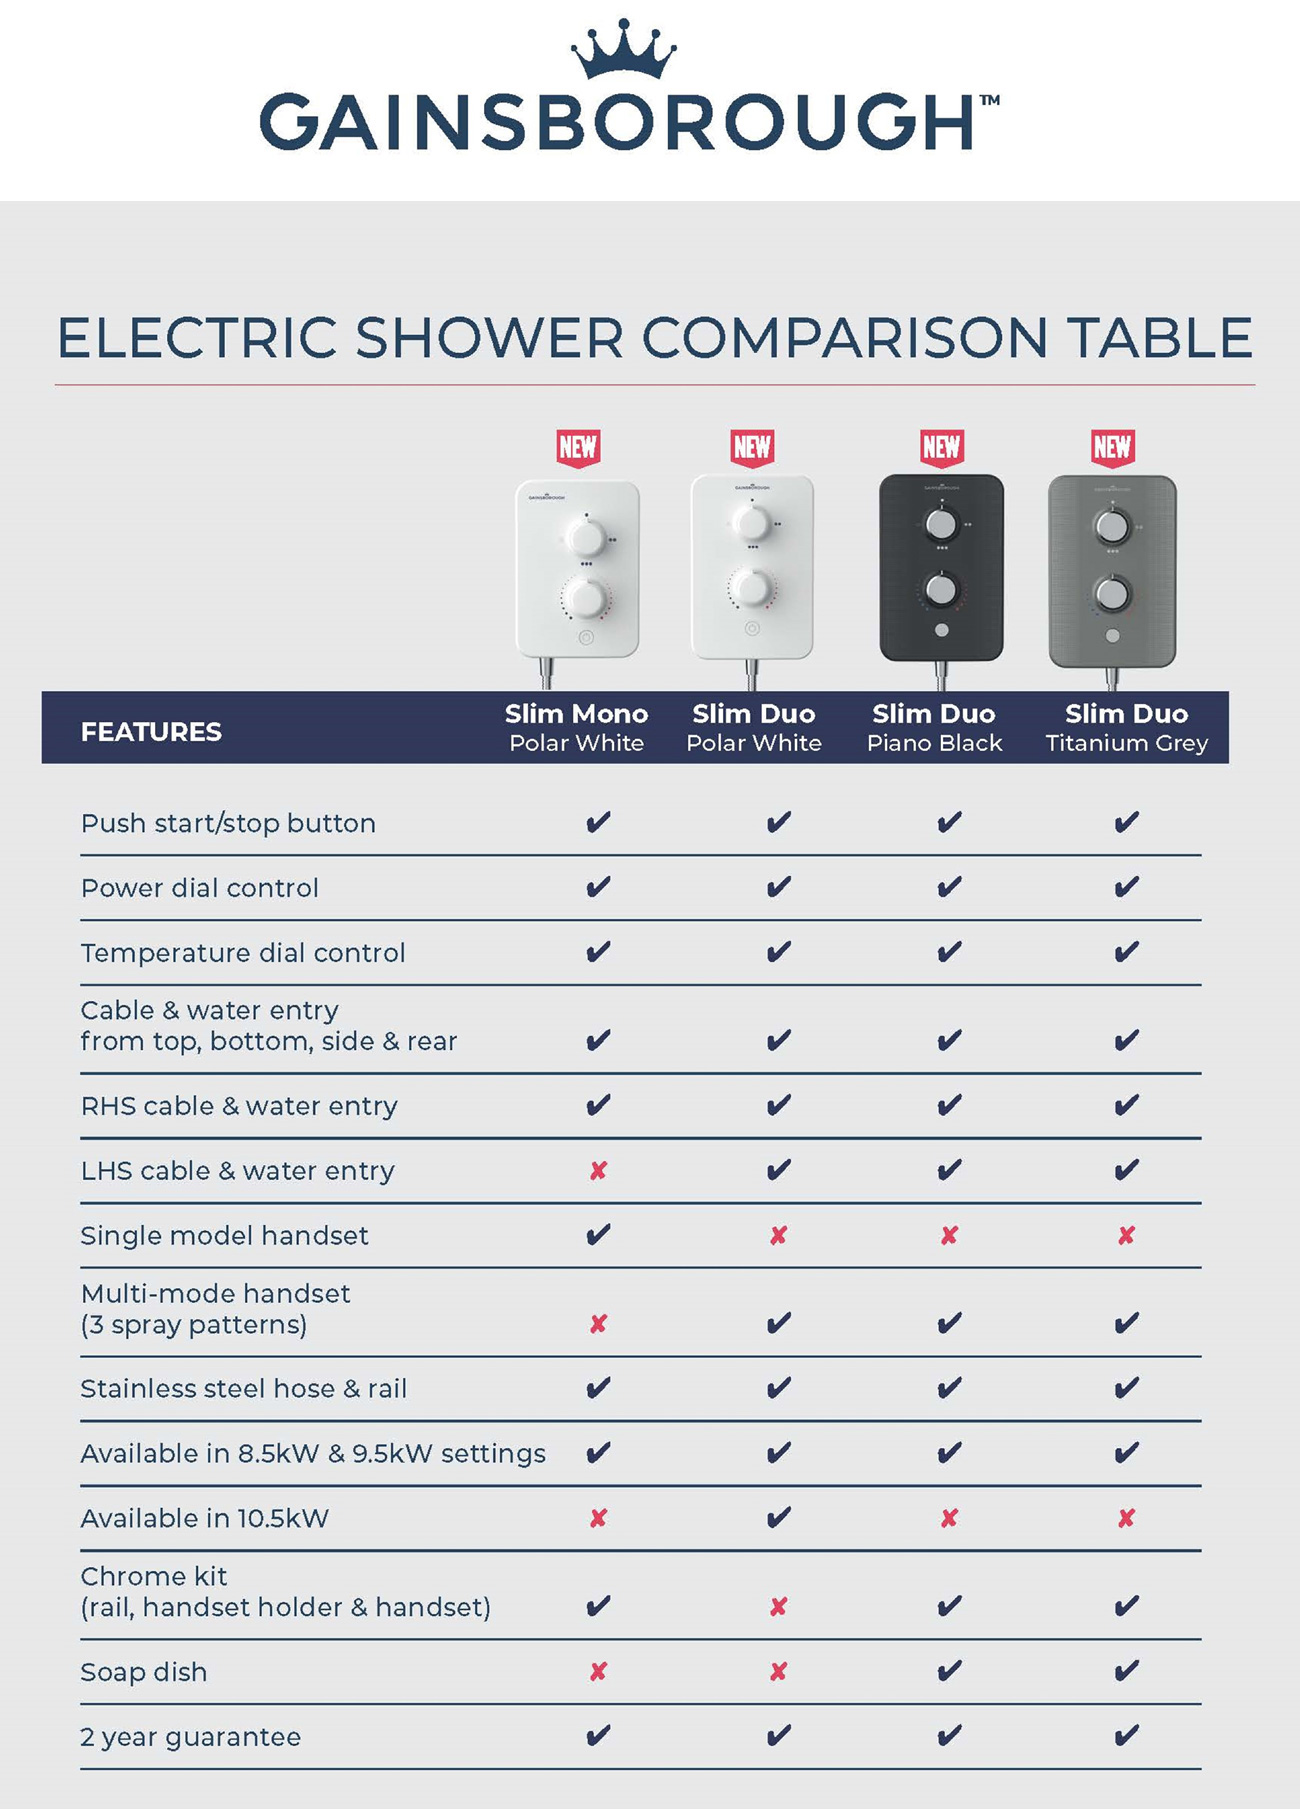 What are the features of the new Gainsborough electric showers